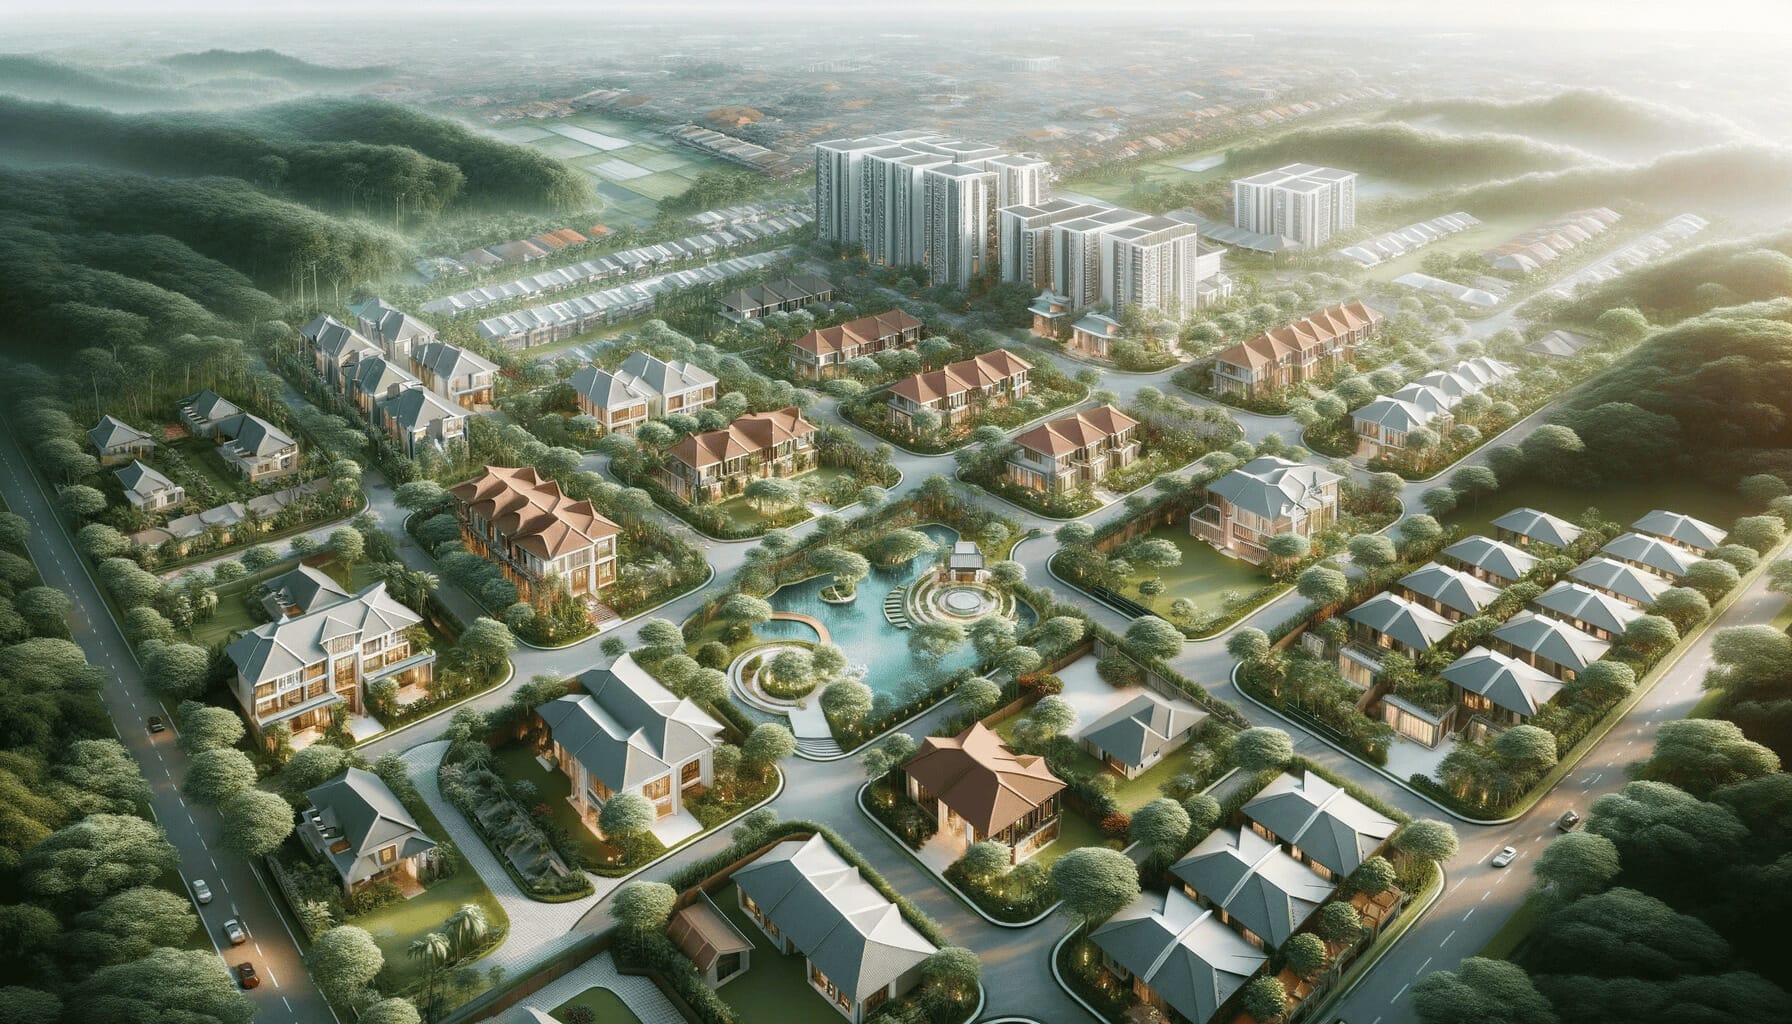 DALL·E 2023 10 16 17.26.40 An elegant birds eye view of a Malaysian housing development in 2023 showing a mix of traditional and modern homes surrounded by greenery without a